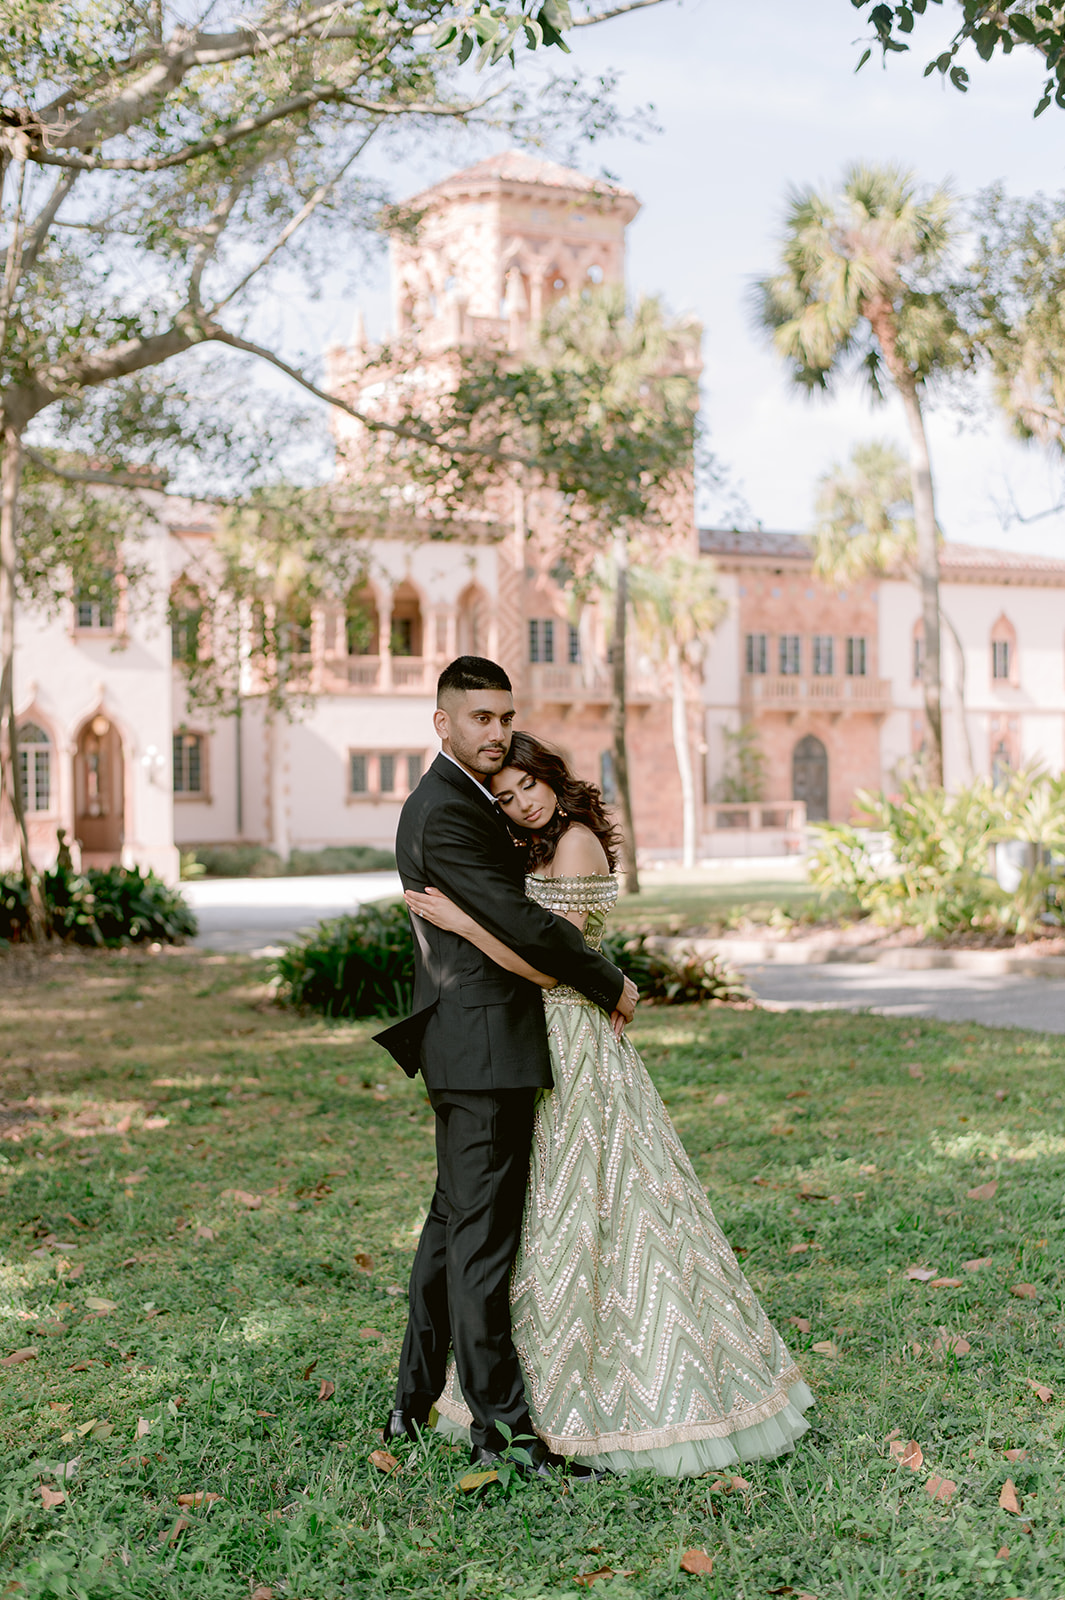 "Beautiful engagement session features stunning Indian couple at the Ringling Museum"
